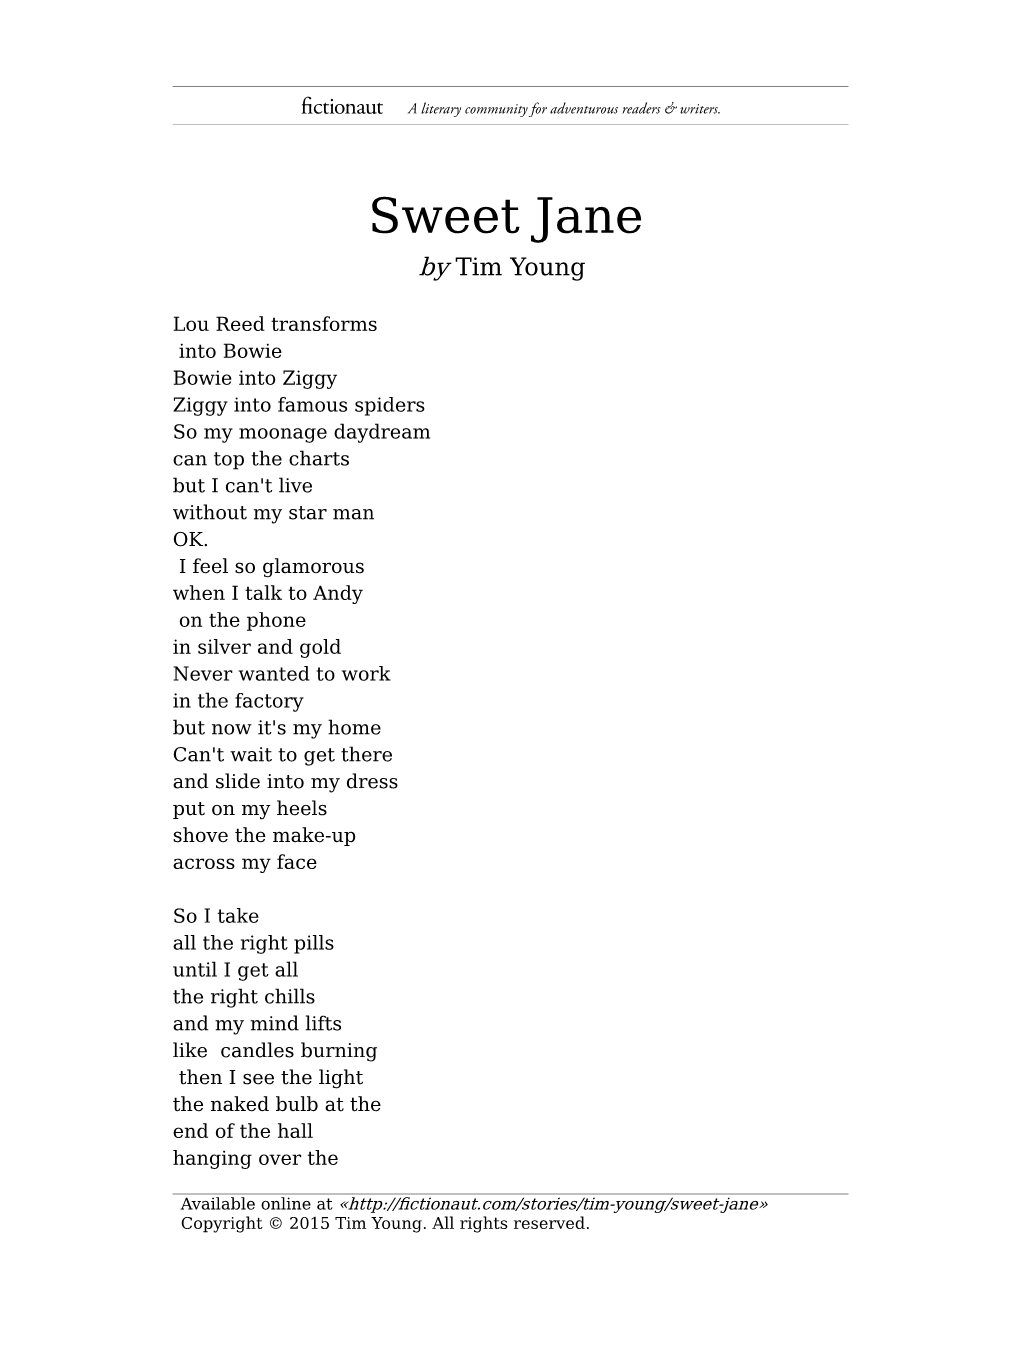 Sweet Jane by Tim Young